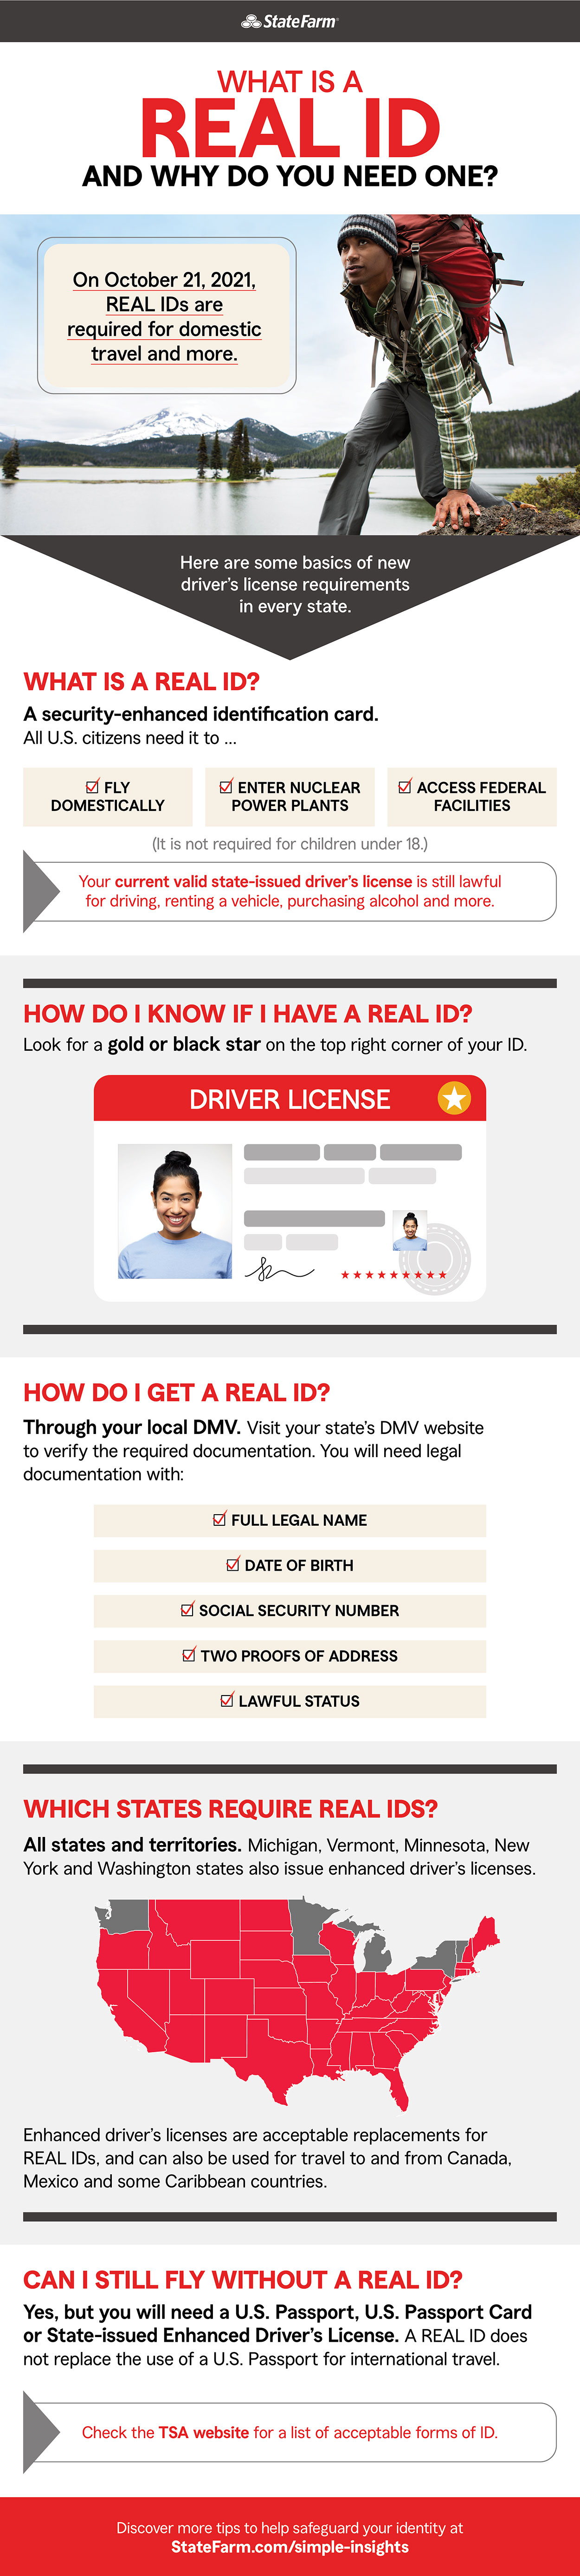 what-is-a-real-id-infographic